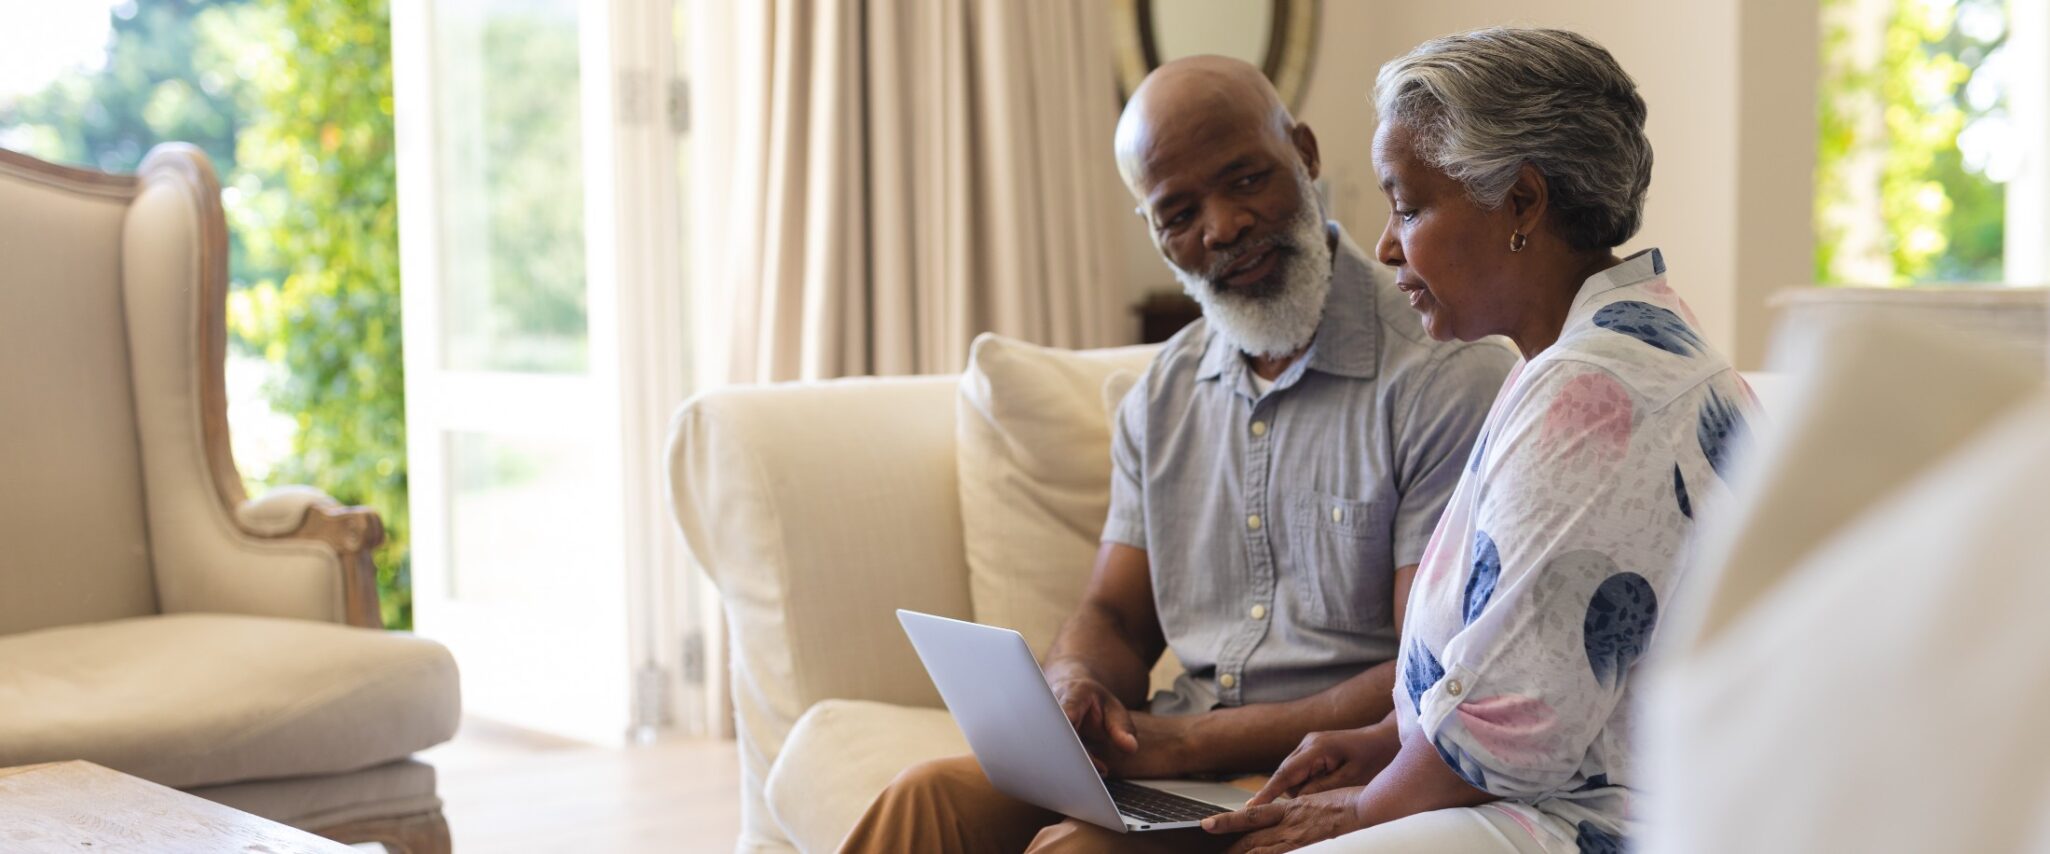 A senior african american man and woman sit on a couch together while looking at a computer.